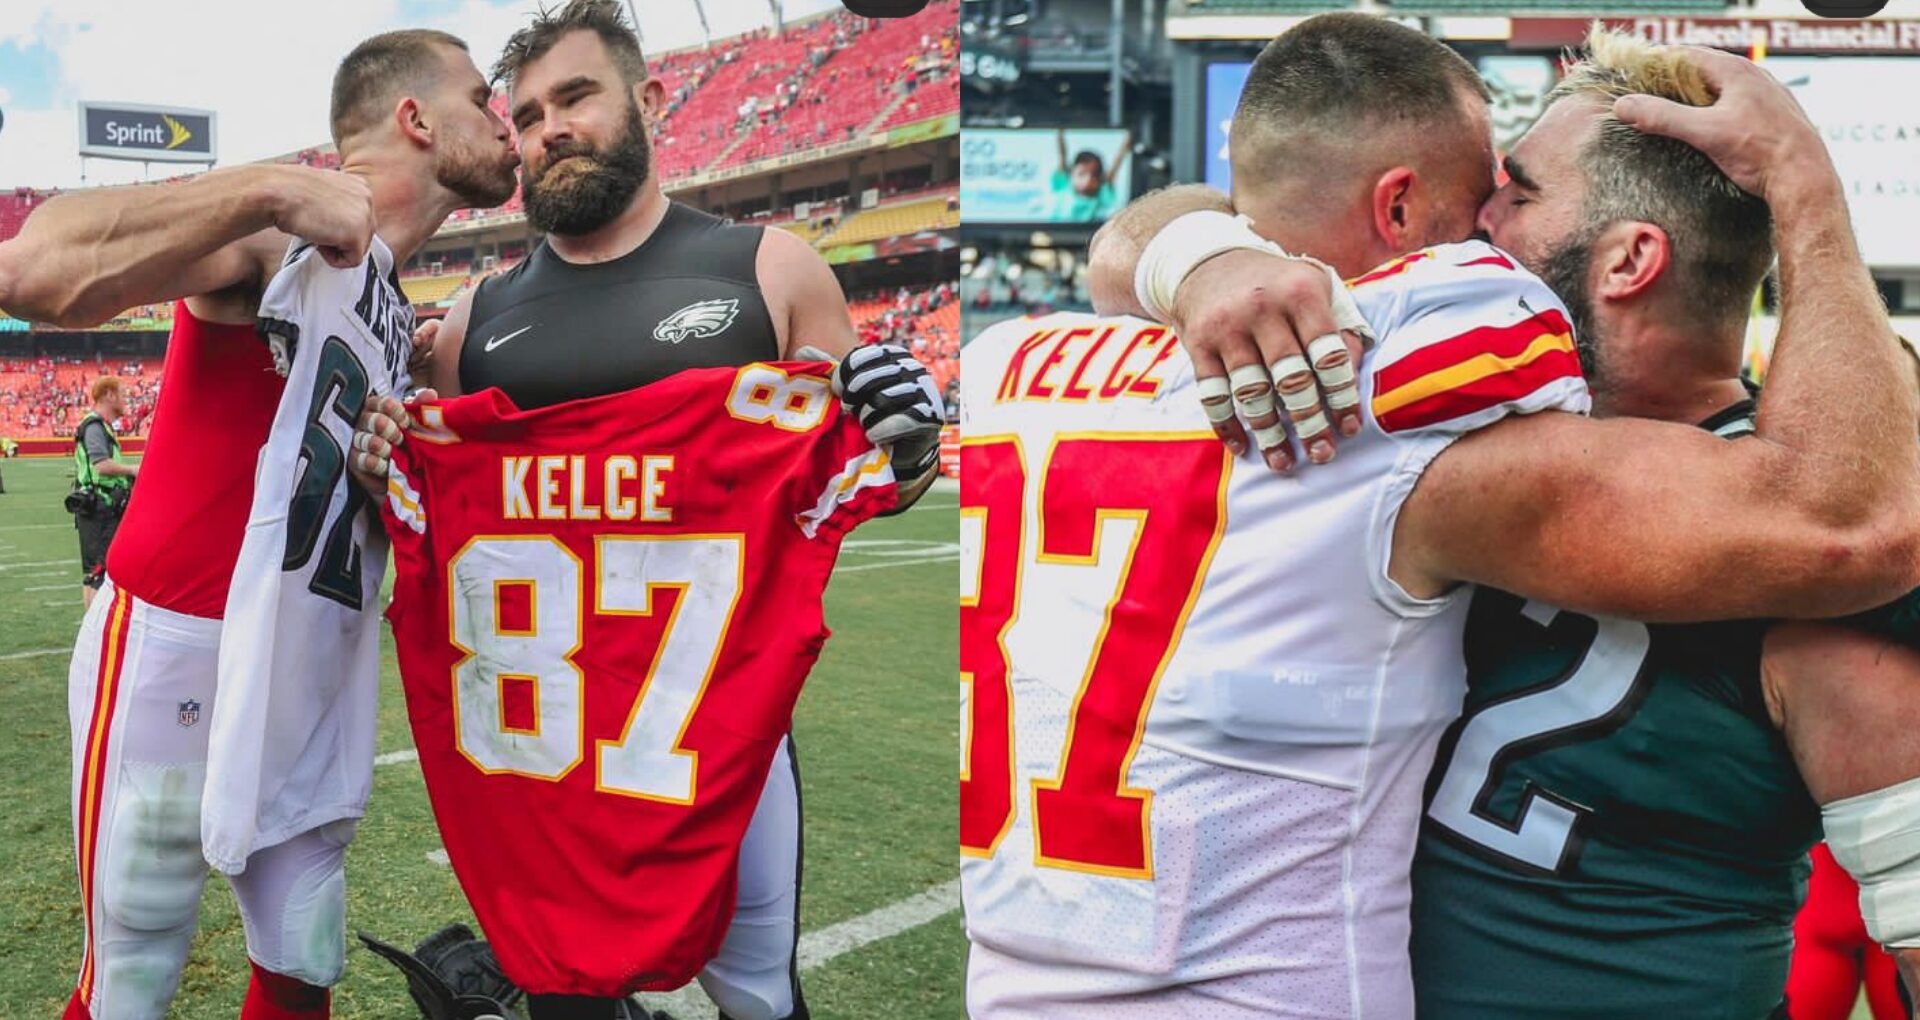 Breaking News: The Kelce brothers, Travis and Jason, have decided not to play against each other. They won't be on the field for the Chiefs vs. Eagles game.